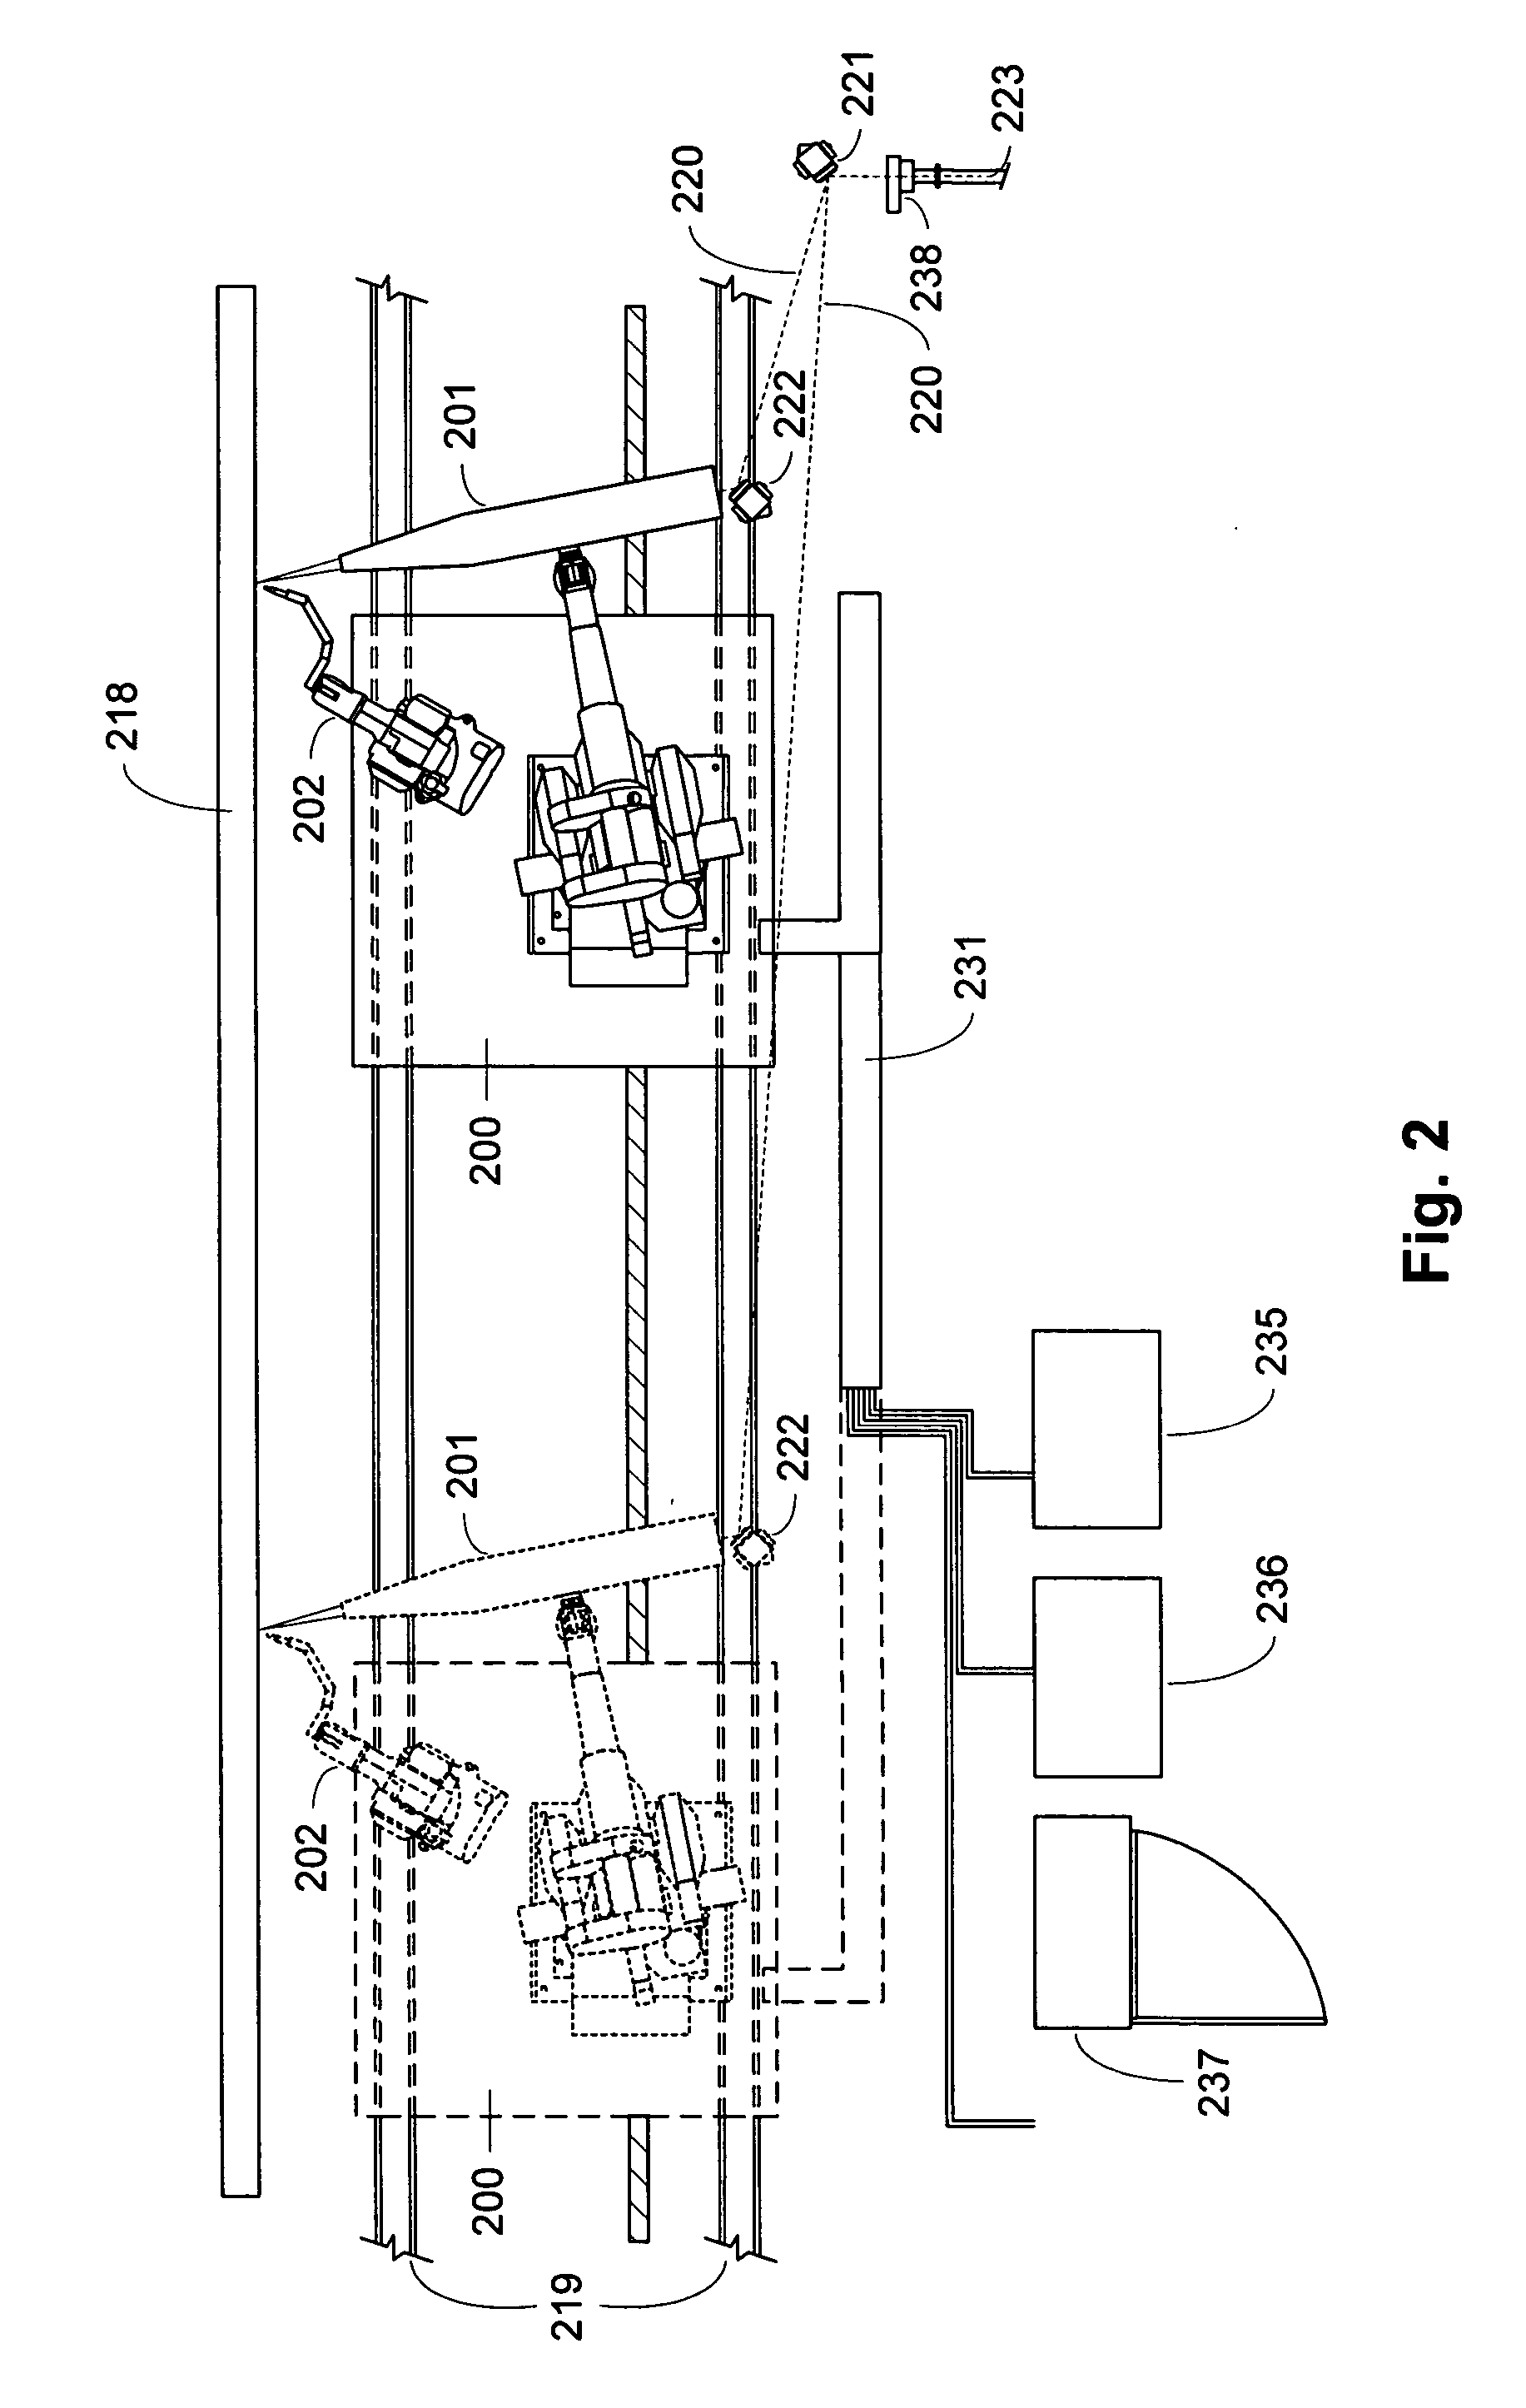 Active beam delivery system with variable optical path segment through air